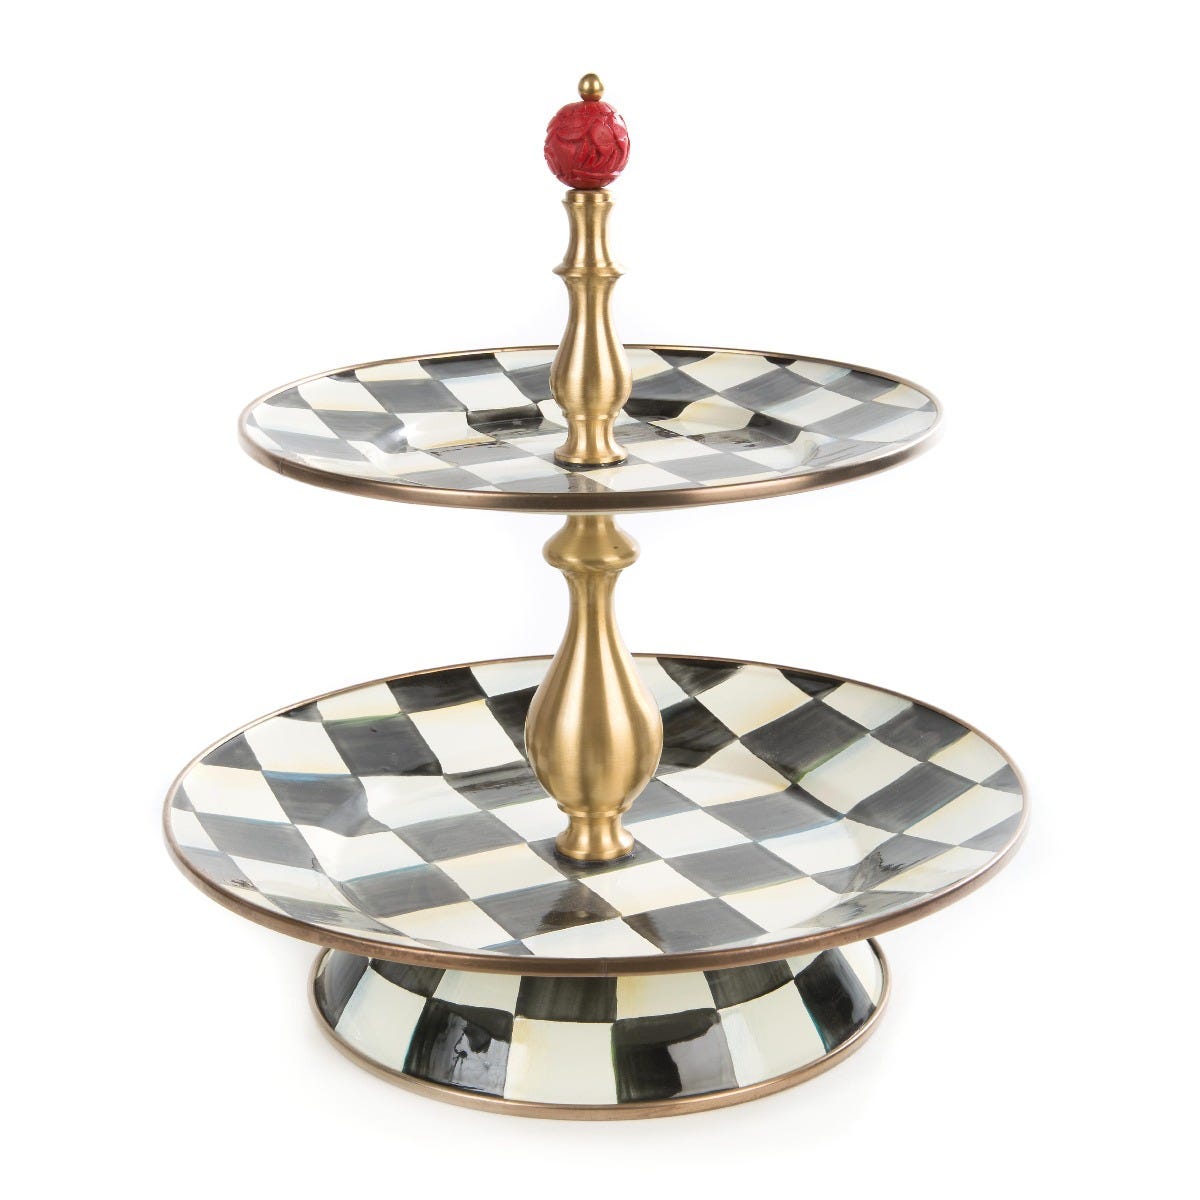 MacKenzie-Childs Courtly Check Two Tier Cake Stand, Fortnum & Mason